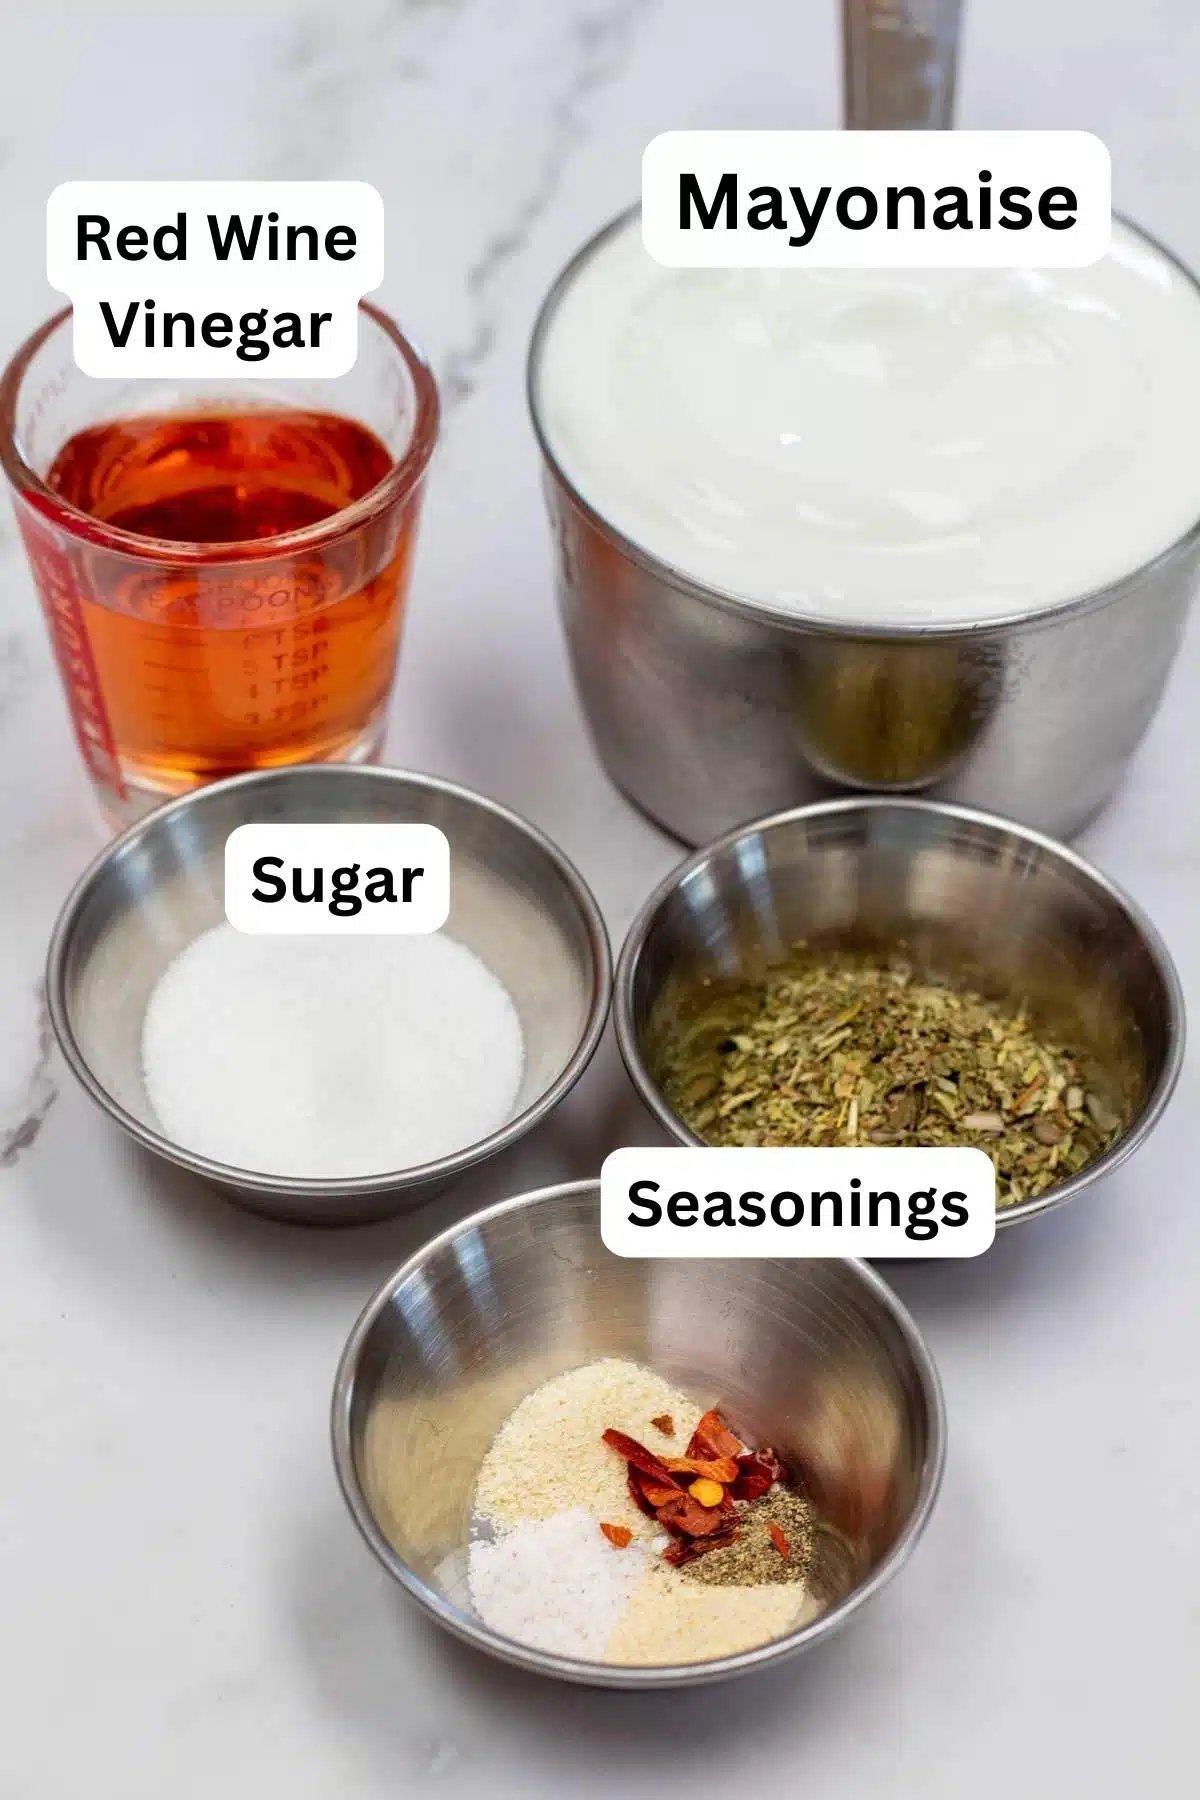 Tall image showing the ingredients needed to make the Italian dressing, with labels on each ingredient.